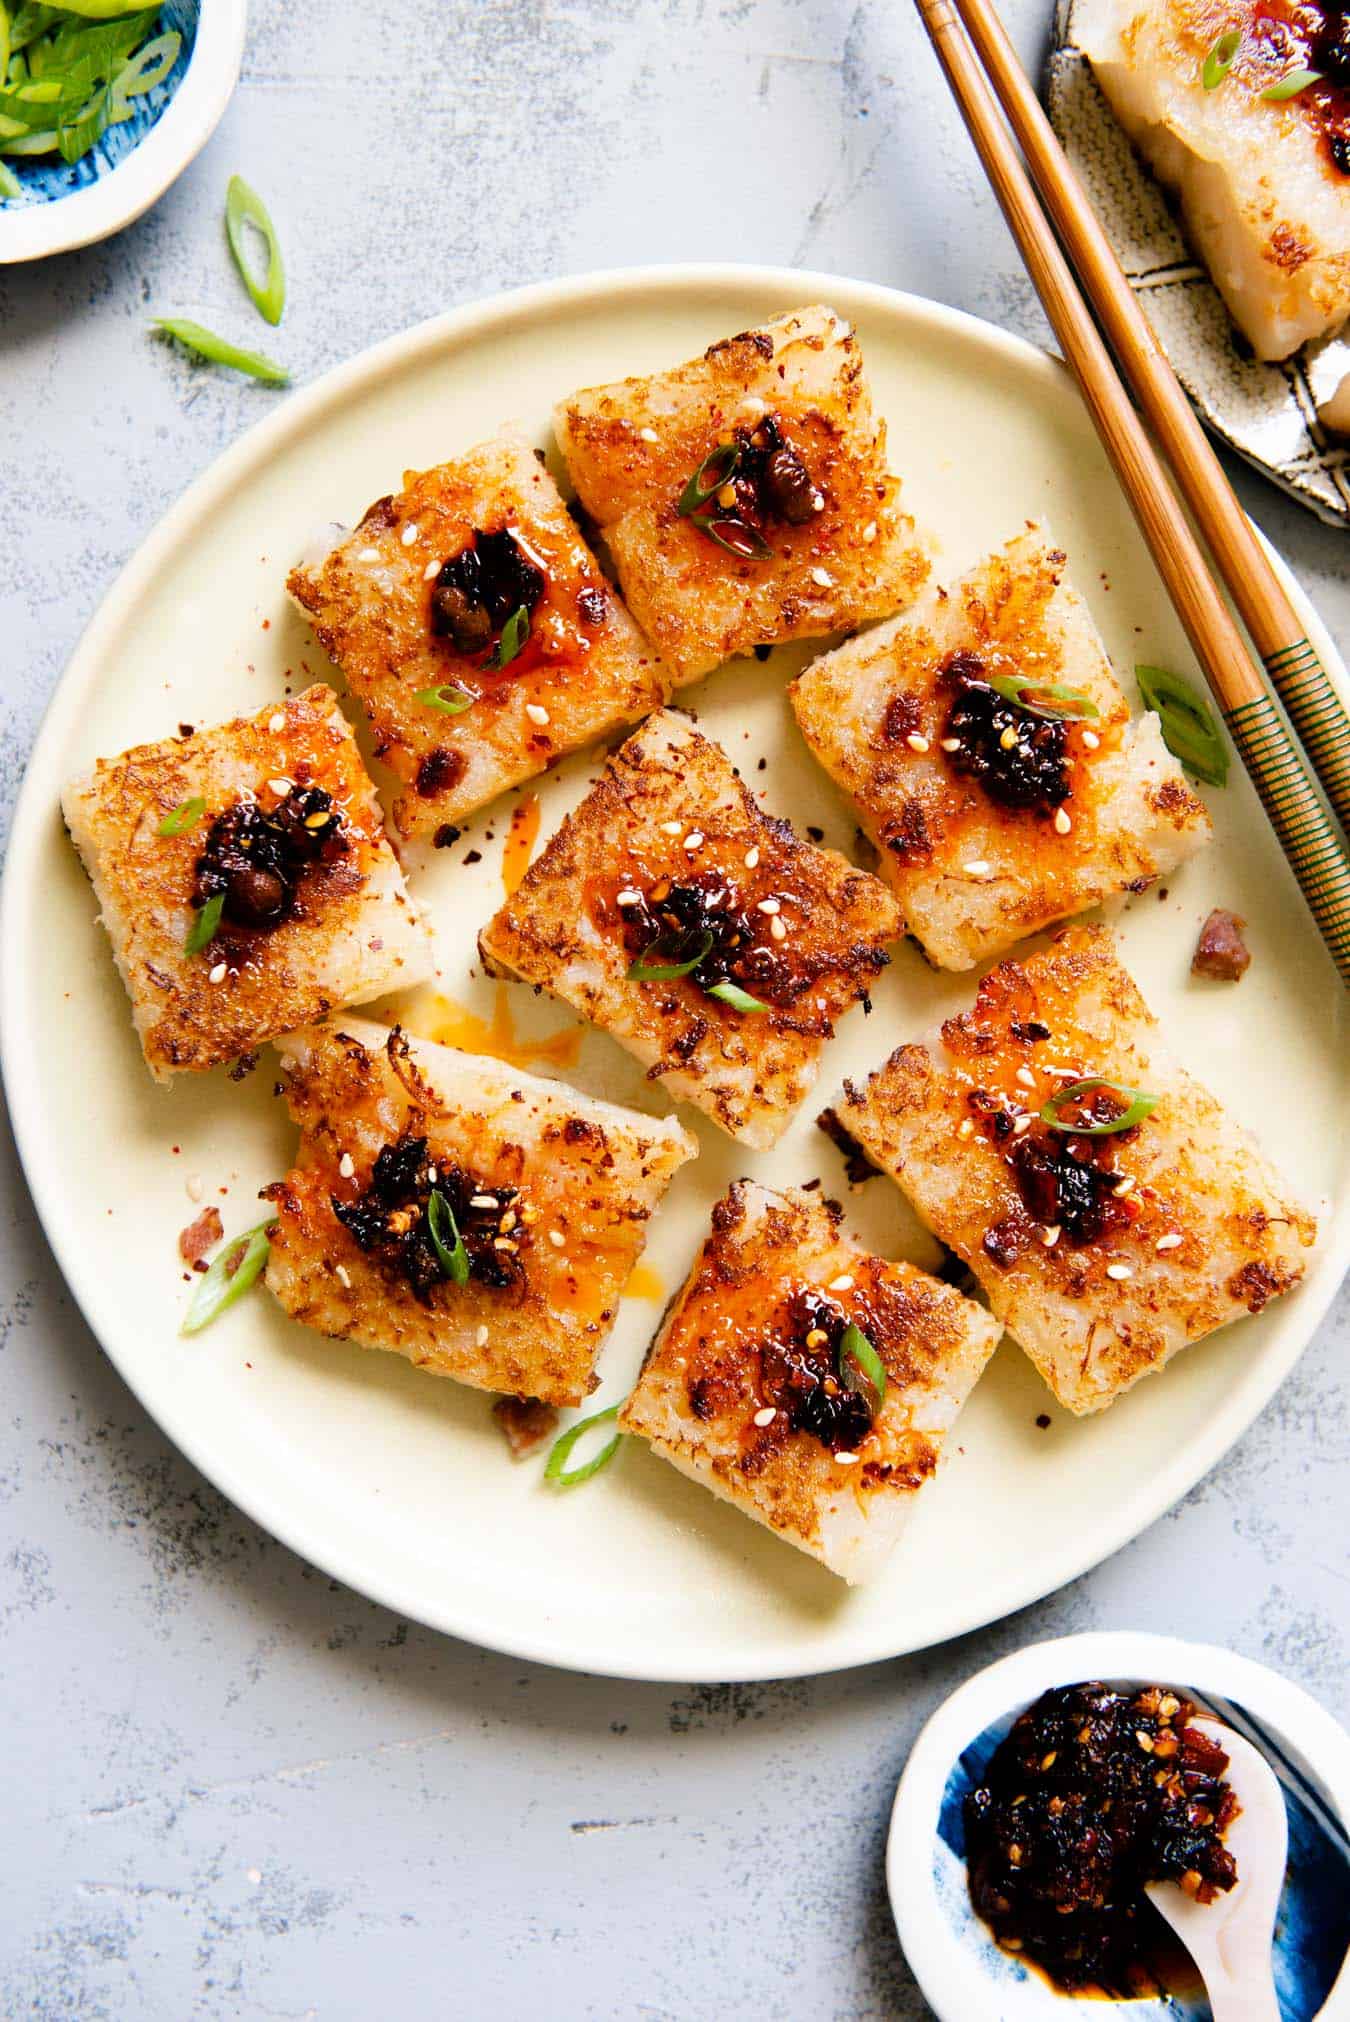 Turnip Cake Recipe - this is a recipe for the classic Chinese lo bak go